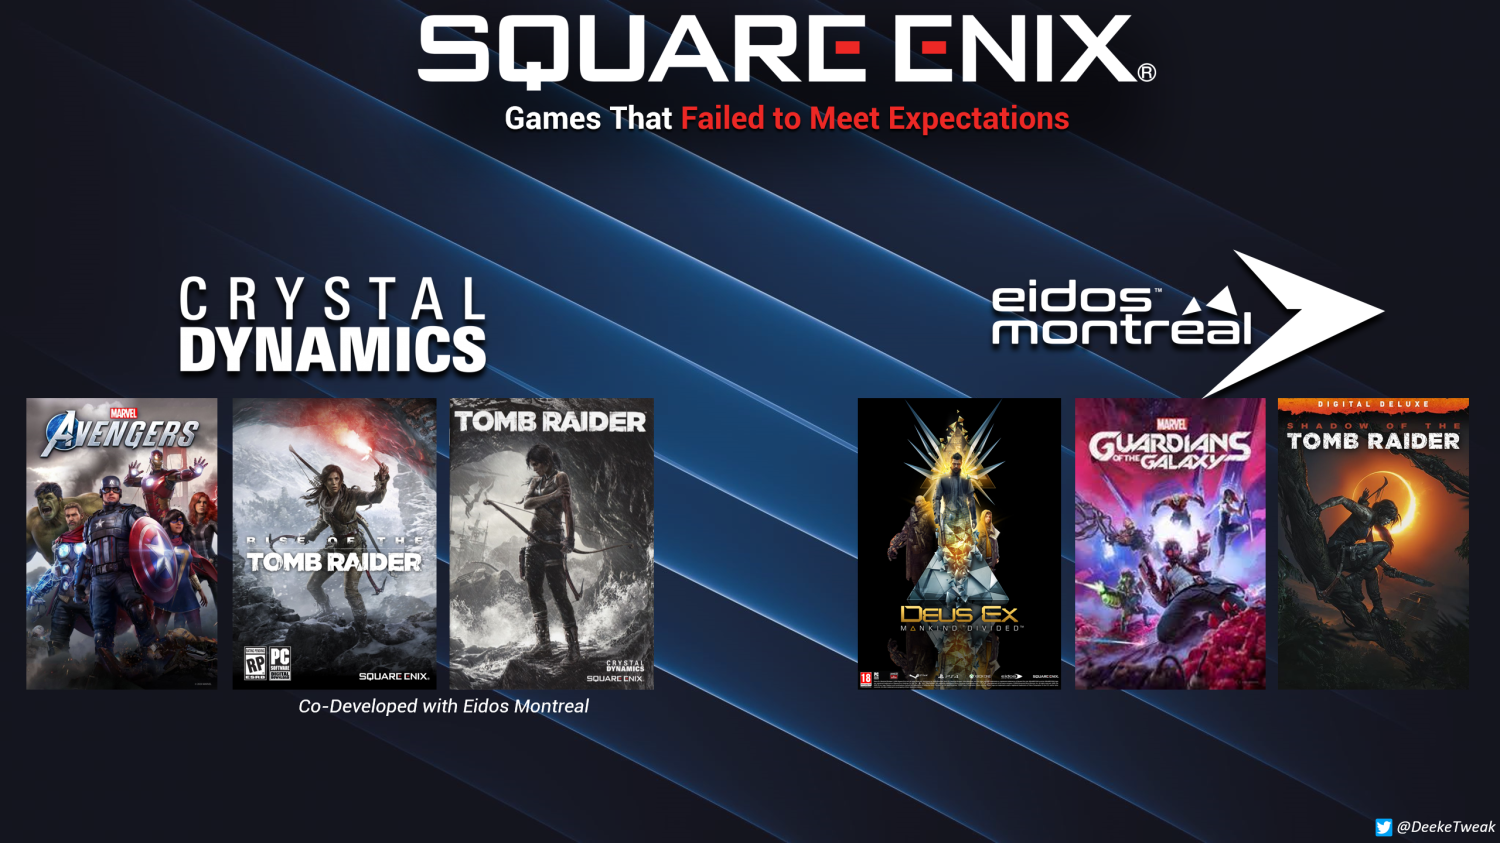 Square Enix is working on two new projects that could be announced